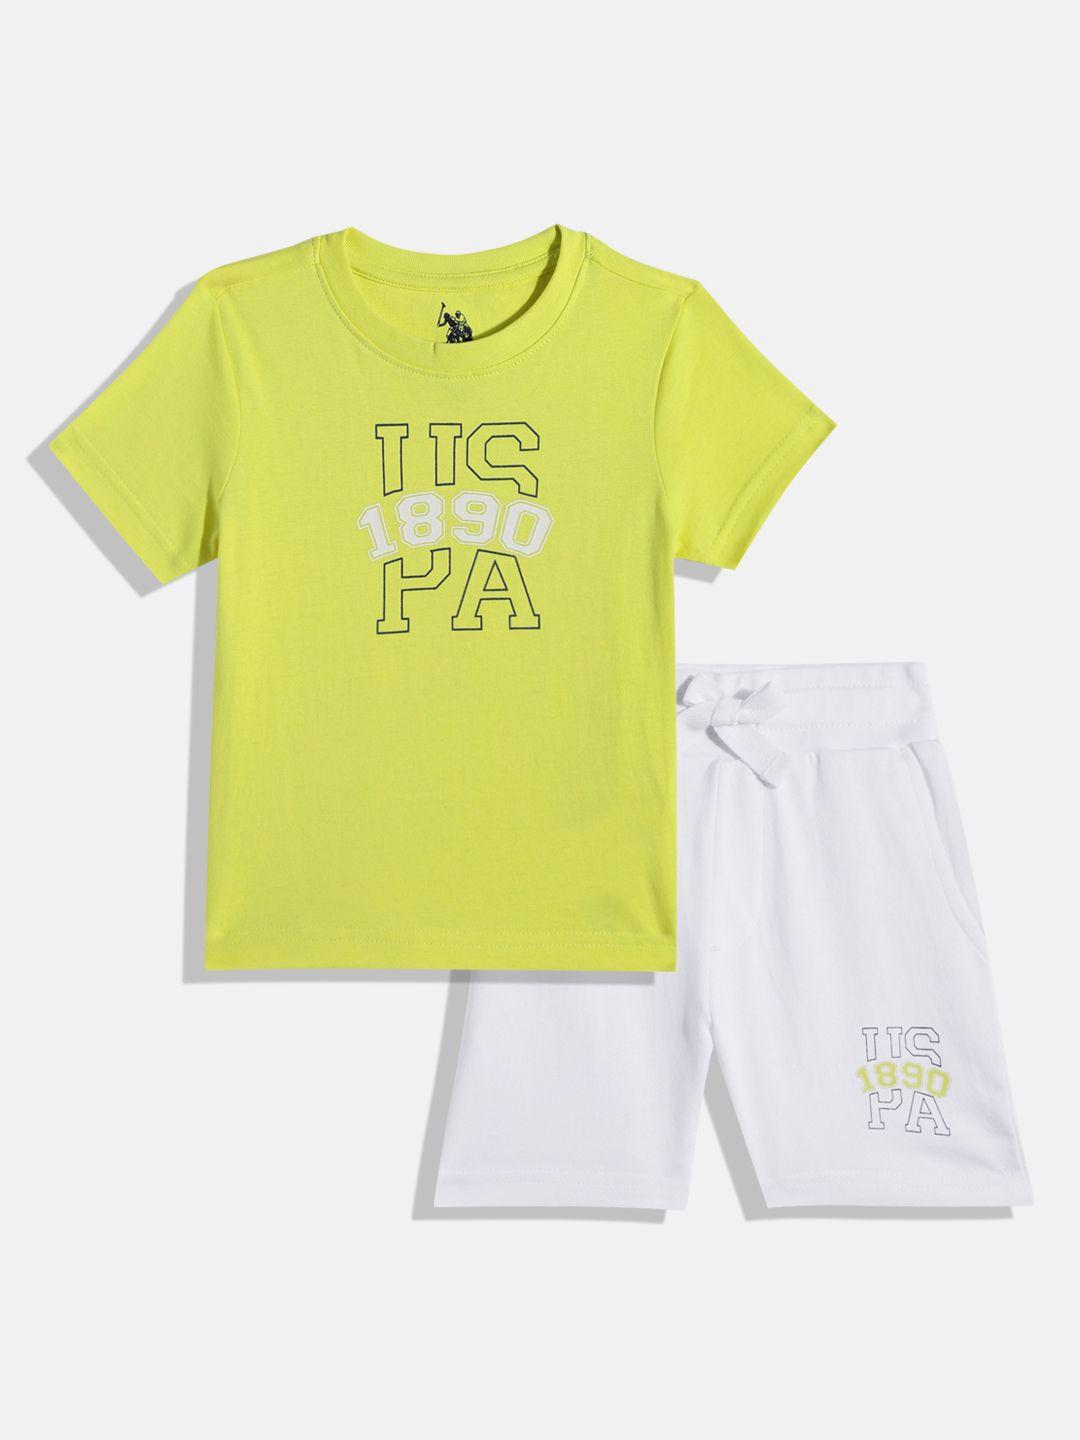 u.s.-polo-assn.-kids-boys-brand-logo-print-knitted-pure-cotton-t-shirt-with-shorts